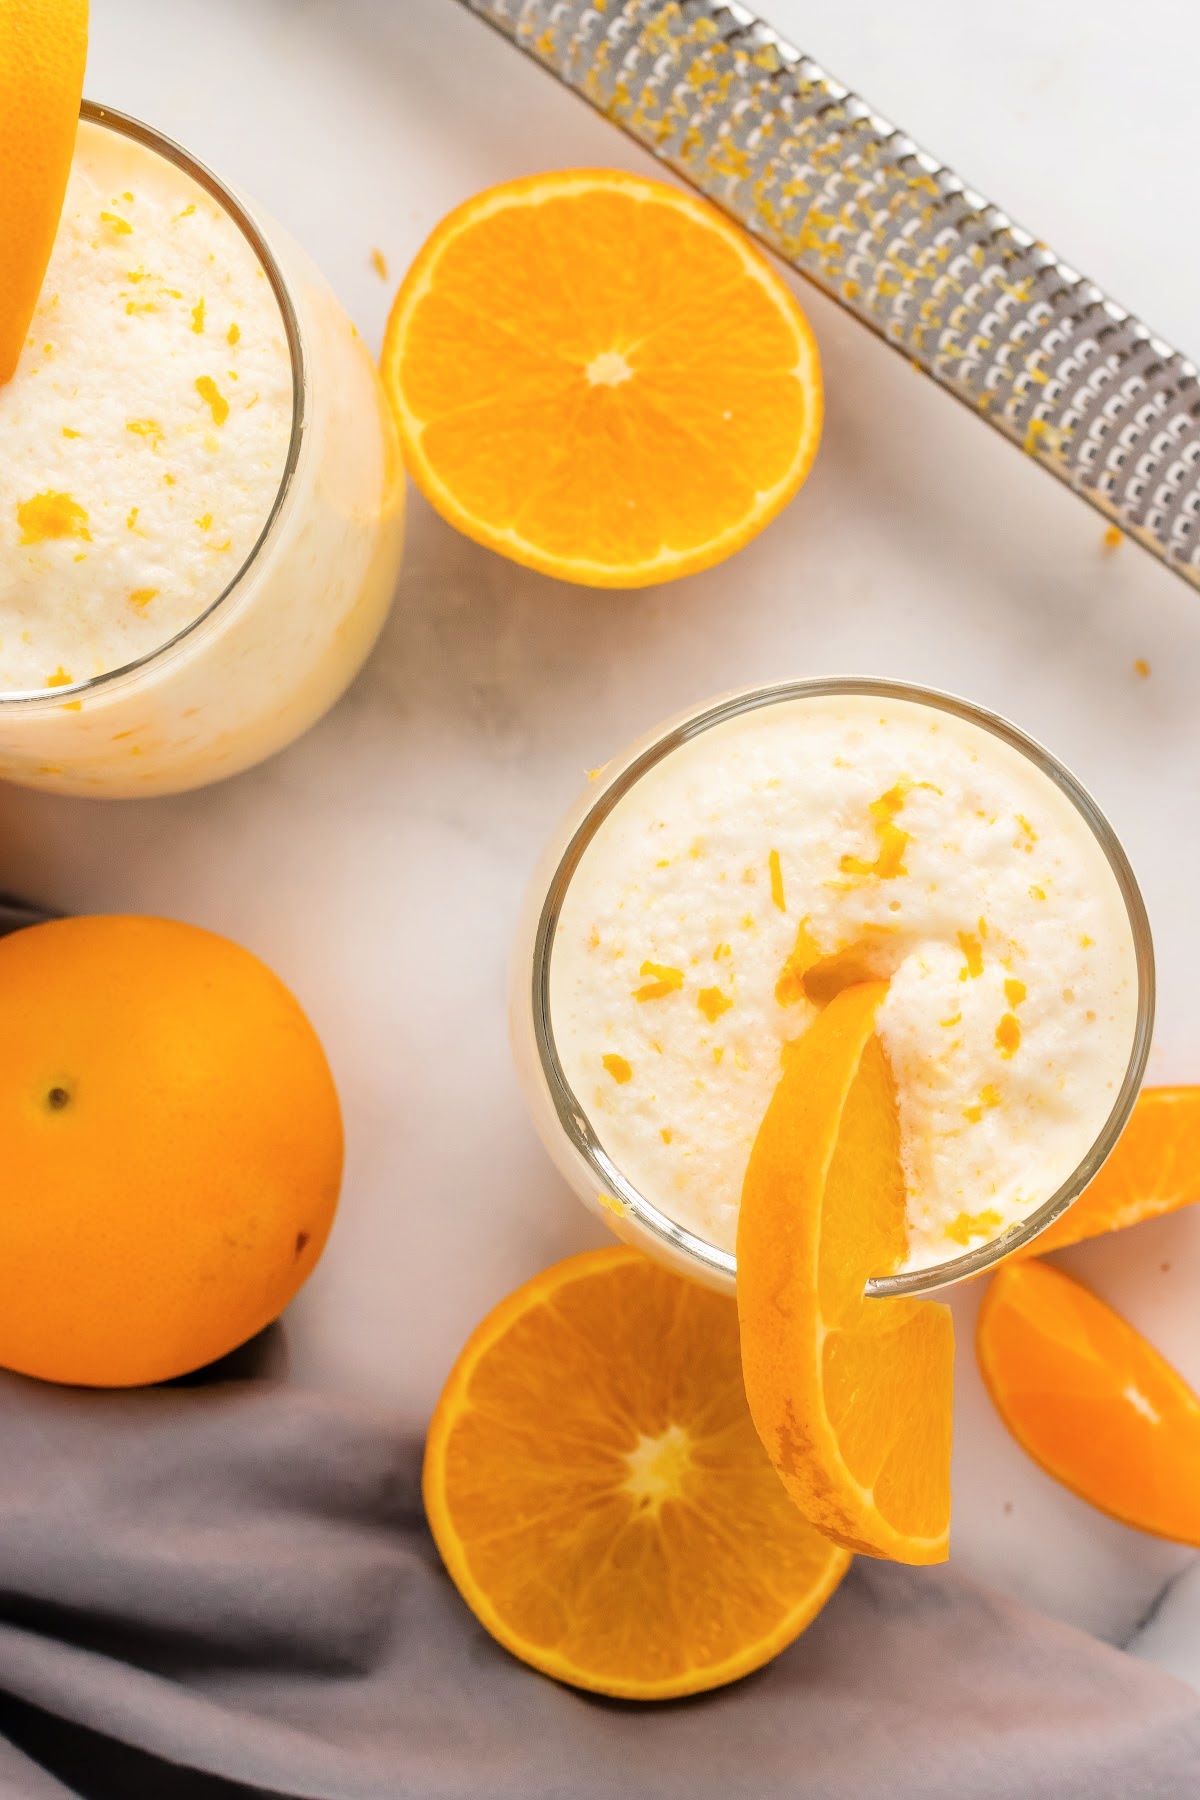 Two glasses full or a creamy orange smoothie with a microplane sitting next to them as well as oranges and orange slices.